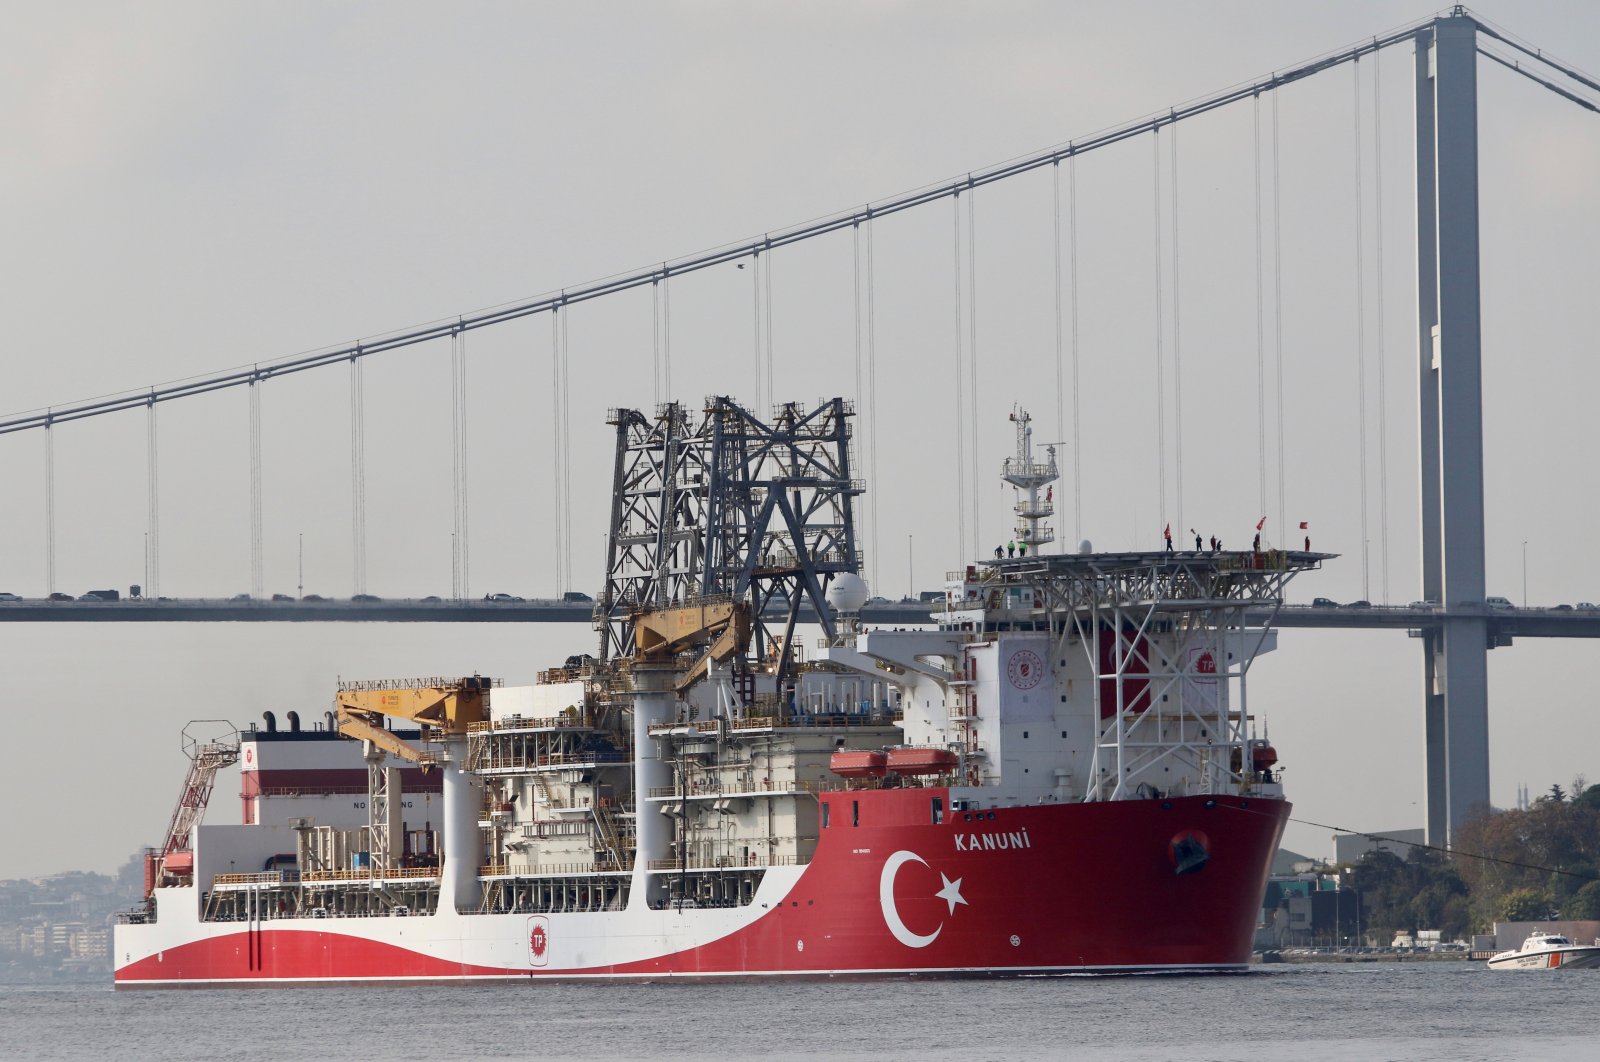 Turkey's drilling vessel Kanuni sails in the Bosporus on its maiden trip to the Black Sea in Istanbul, Turkey, Nov. 13, 2020. (Reuters Photo)